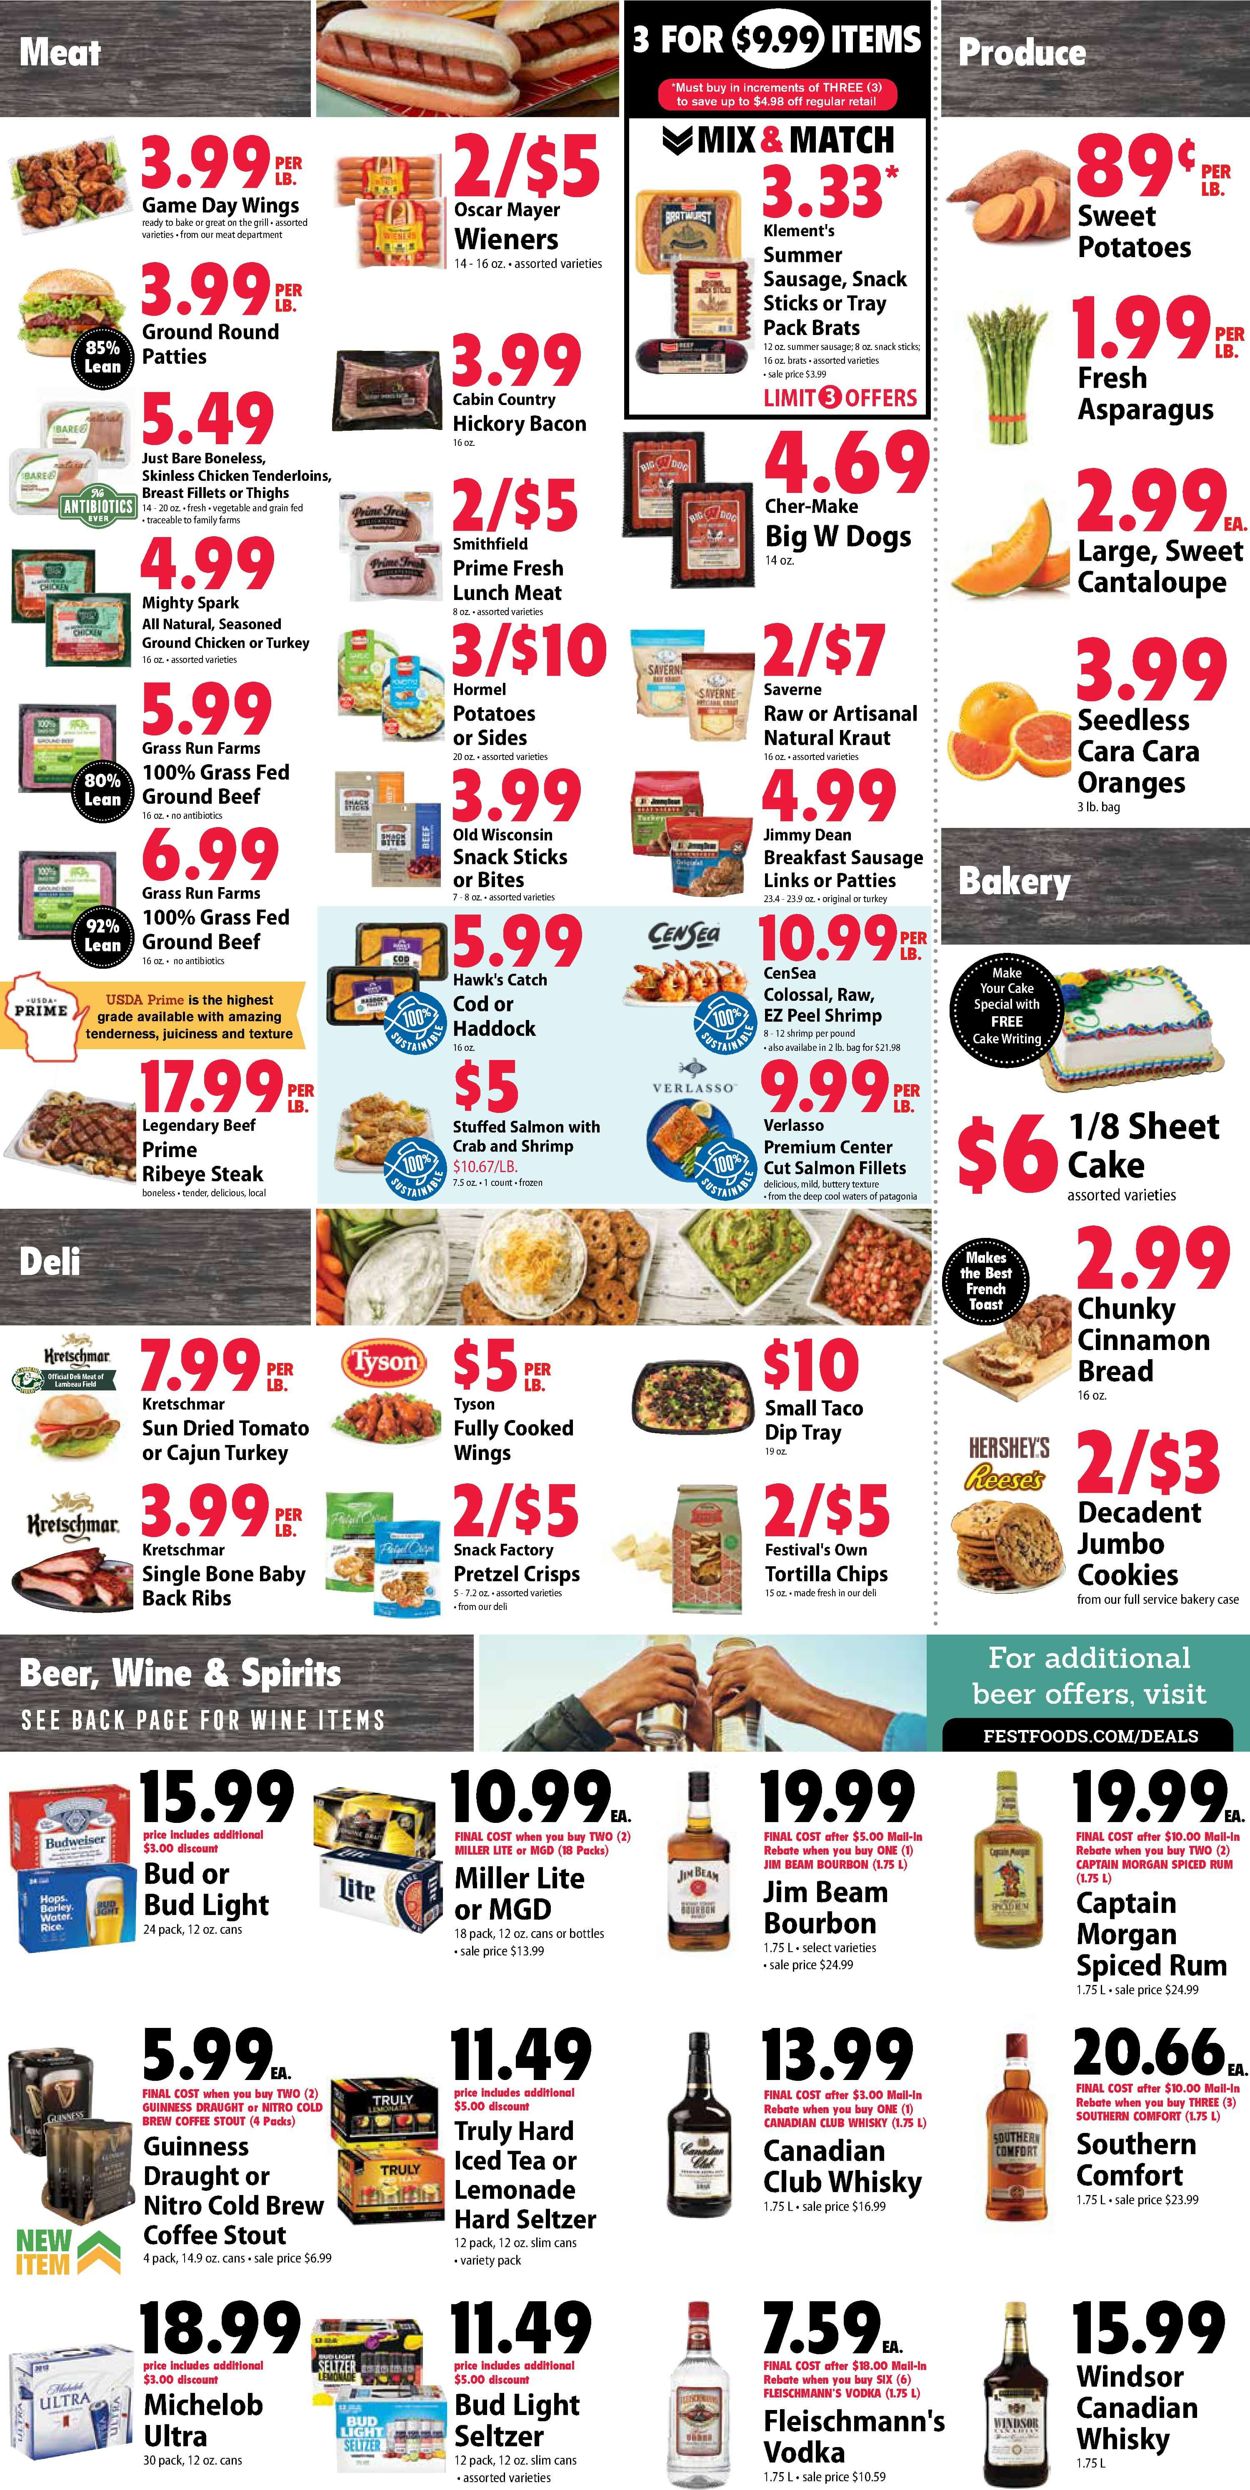 Festival Foods Current weekly ad 03/17 - 03/23/2021 [2] - frequent-ads.com